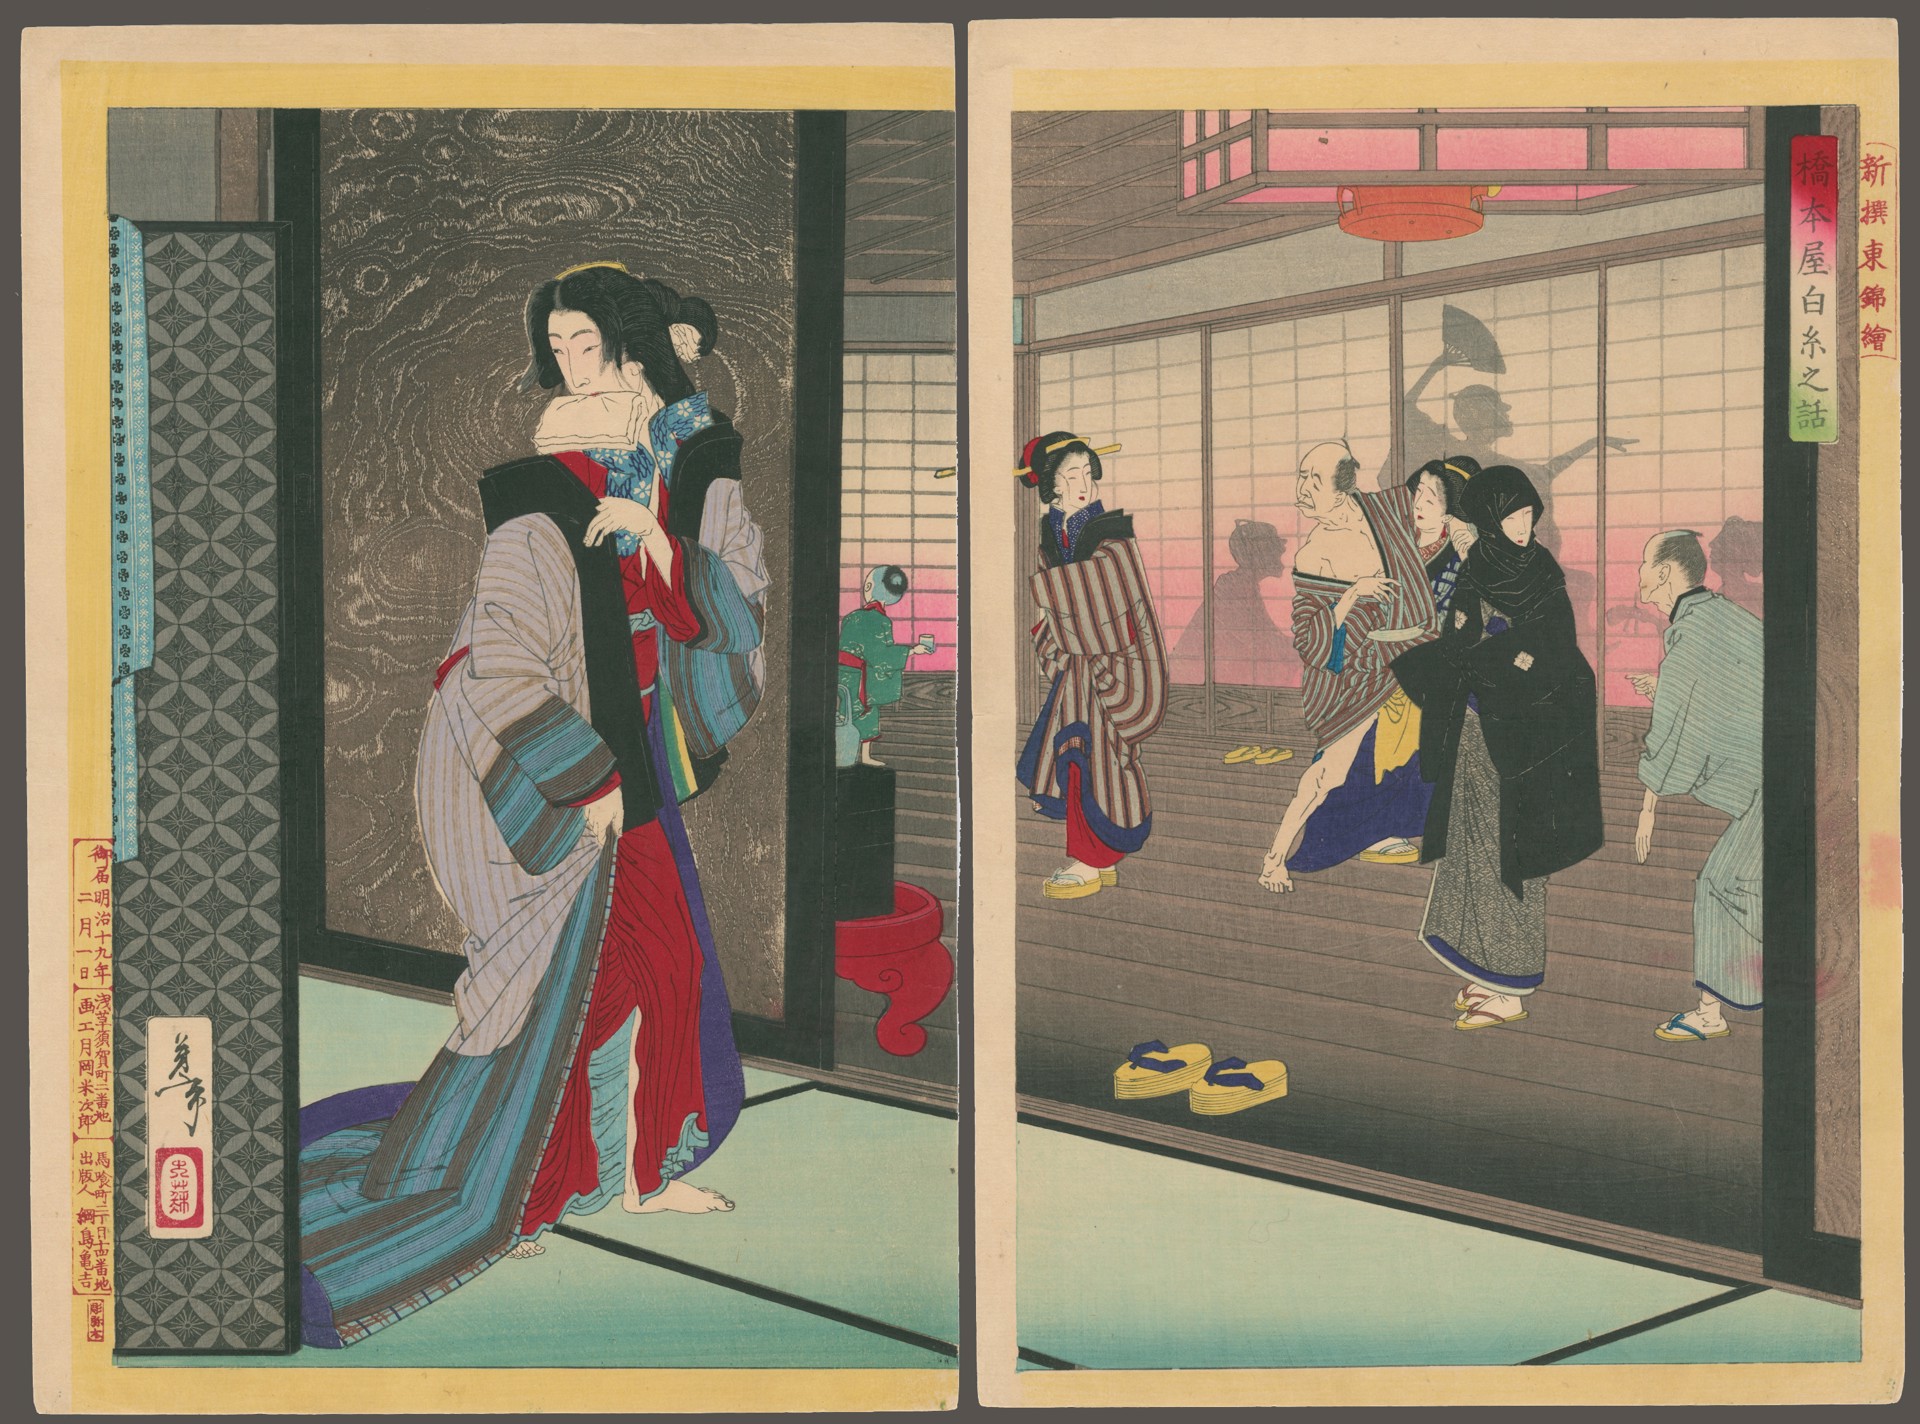 The Story of the Courtesan Shiraito of the Hashimoto-ya Newly Selected Eastern Brocade Pictures by Yoshitoshi